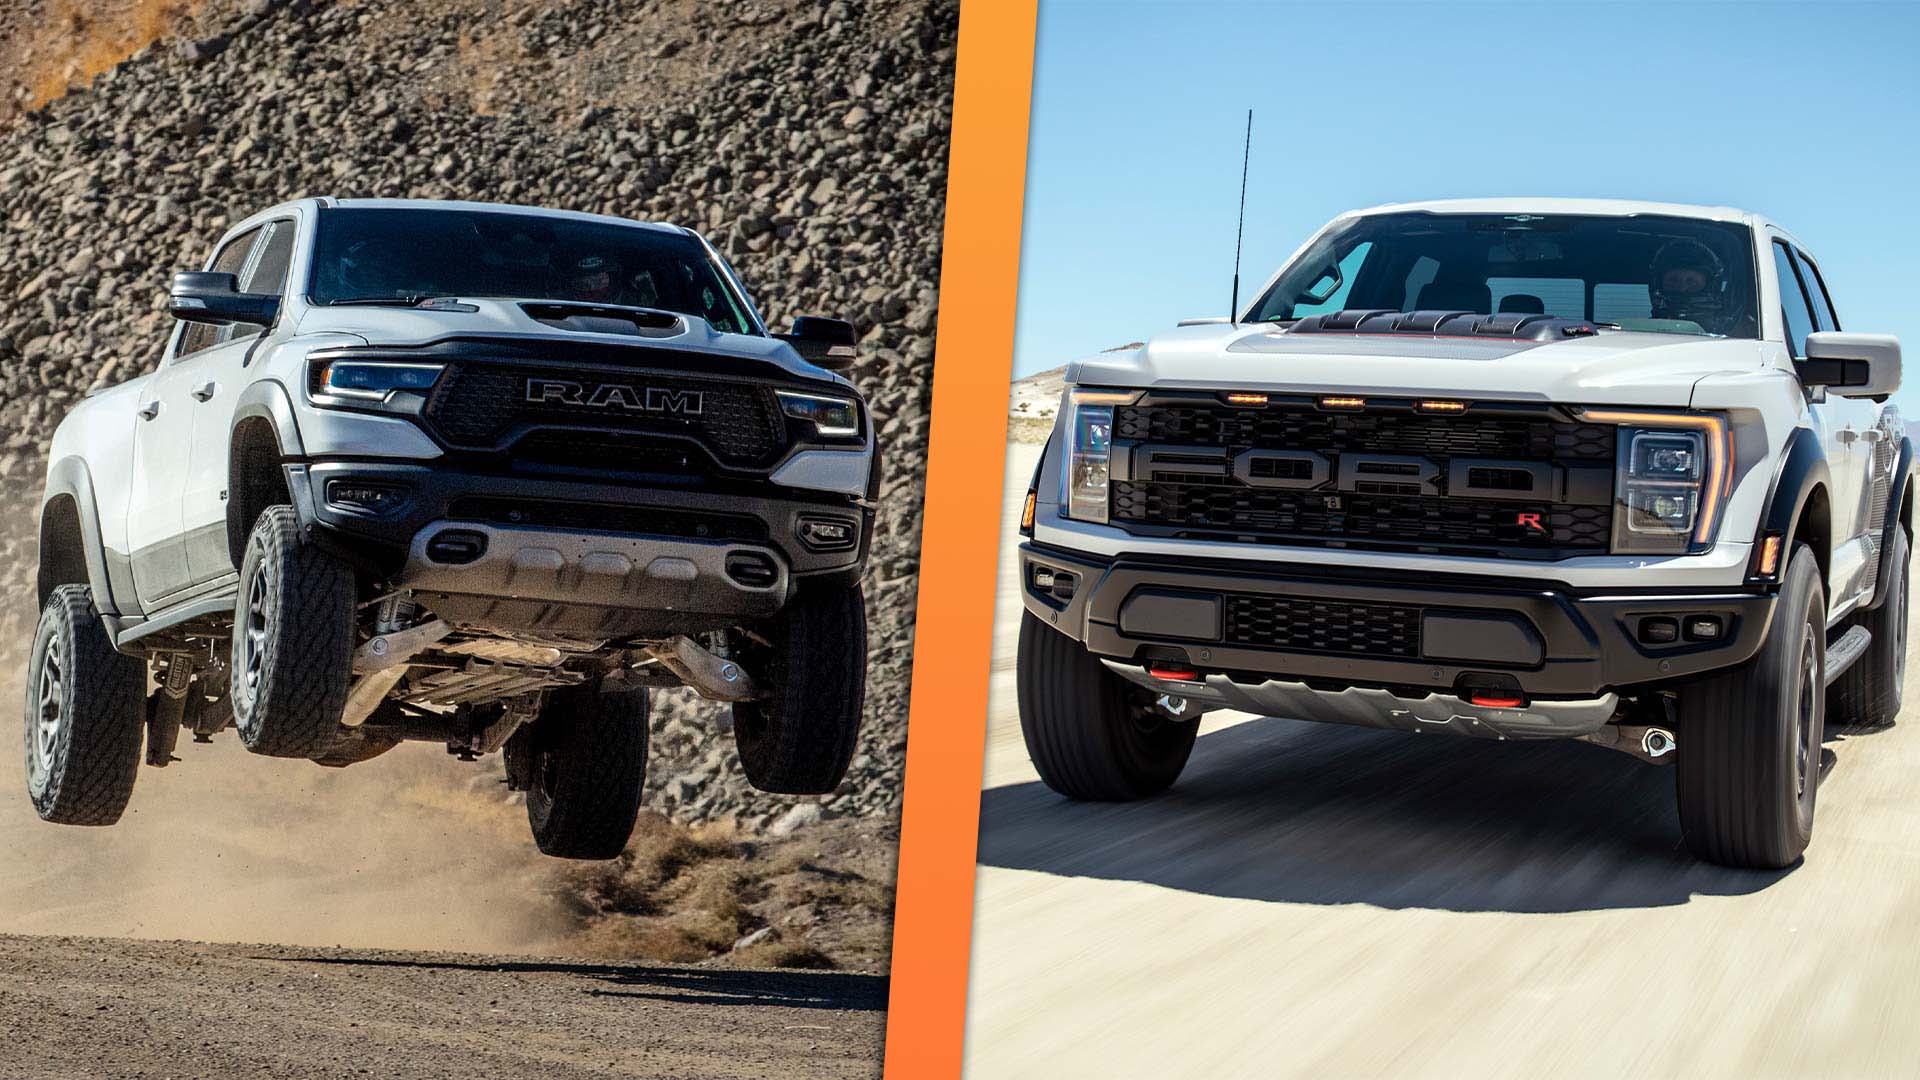 With 720 HP, The Ford F-150 Raptor R Is Now More Powerful Than The Ram TRX